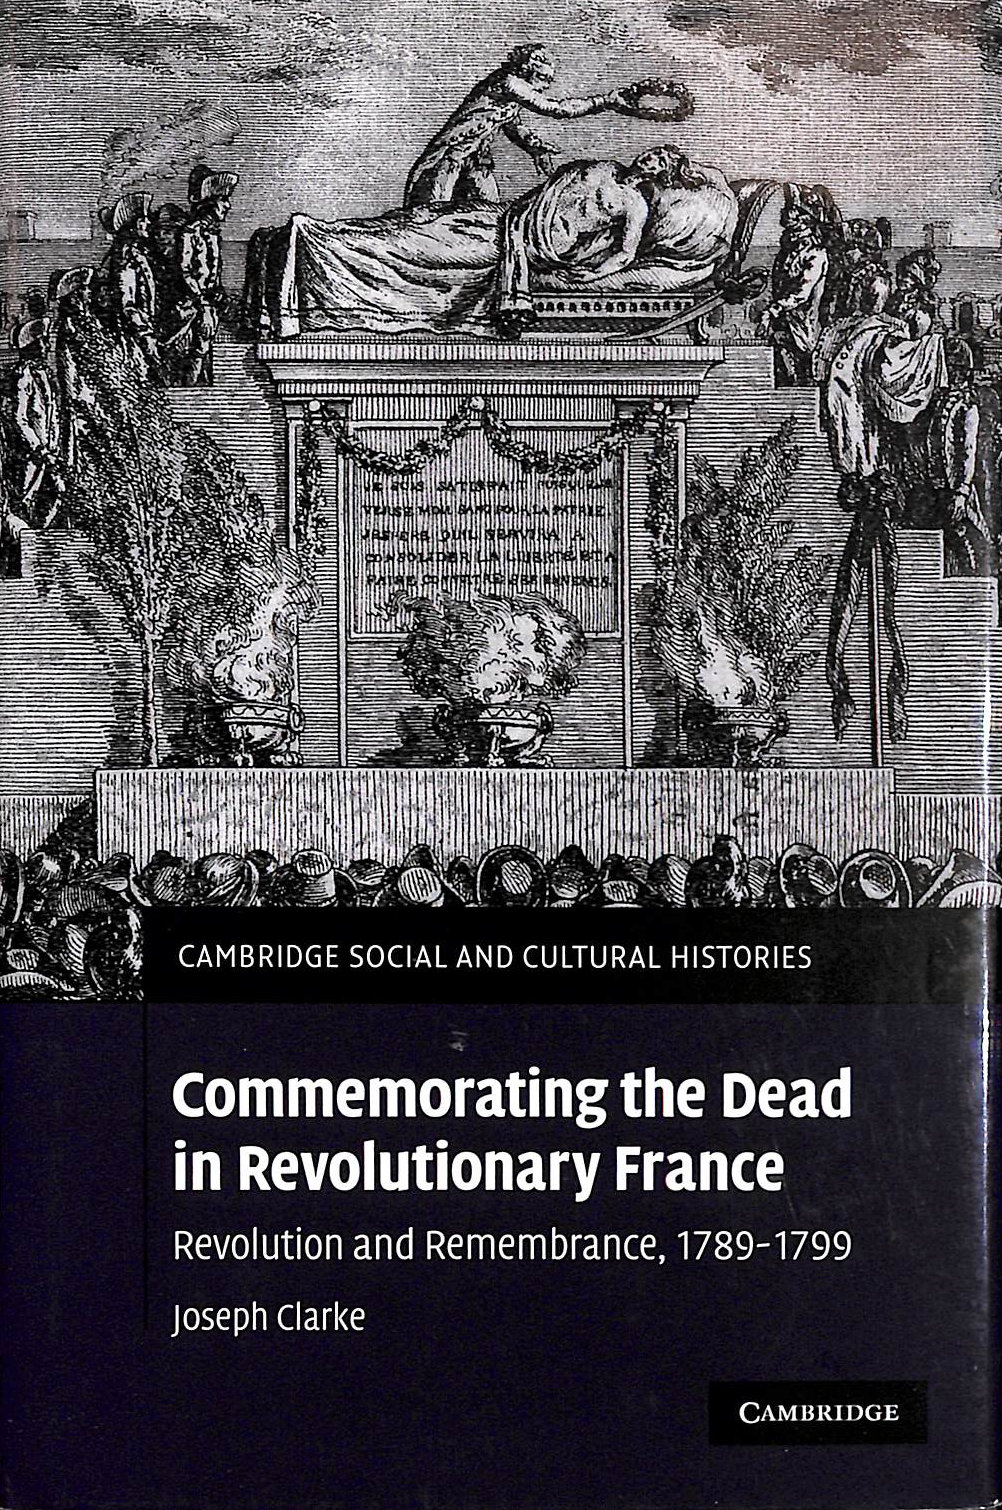 CLARKE, JOSEPH - Commemorating the Dead in Revolutionary France: Revolution and Remembrance, 1789-1799: 11 (Cambridge Social and Cultural Histories, Series Number 11)